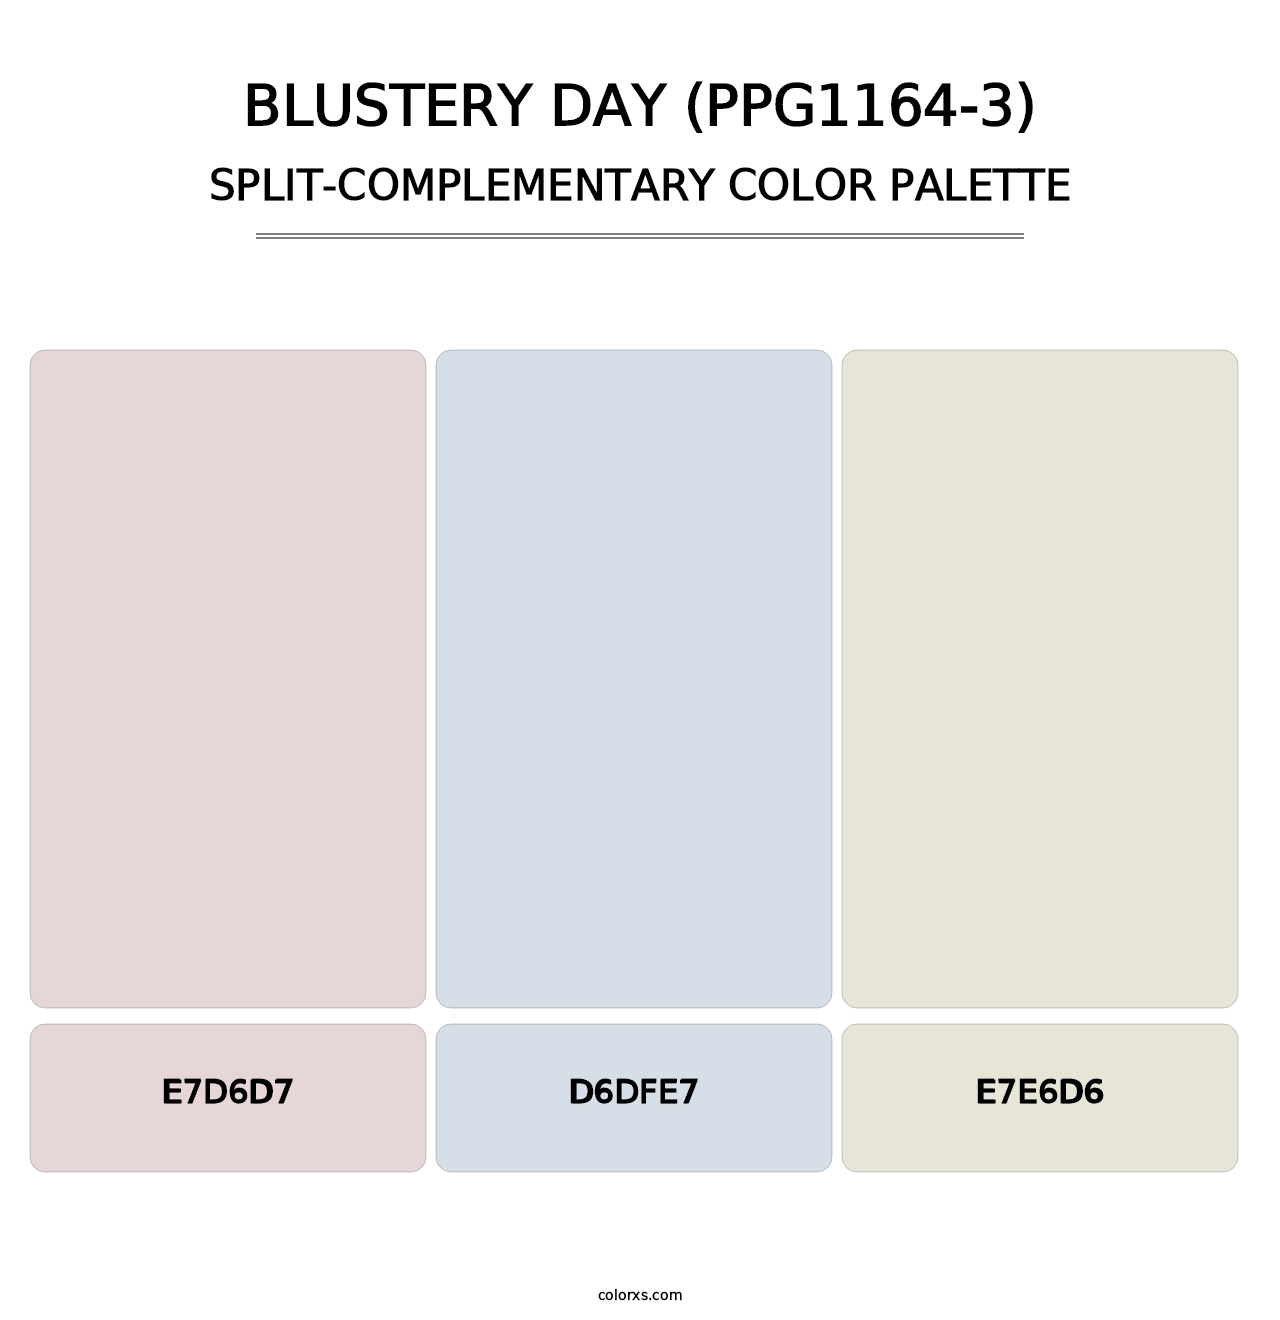 Blustery Day (PPG1164-3) - Split-Complementary Color Palette